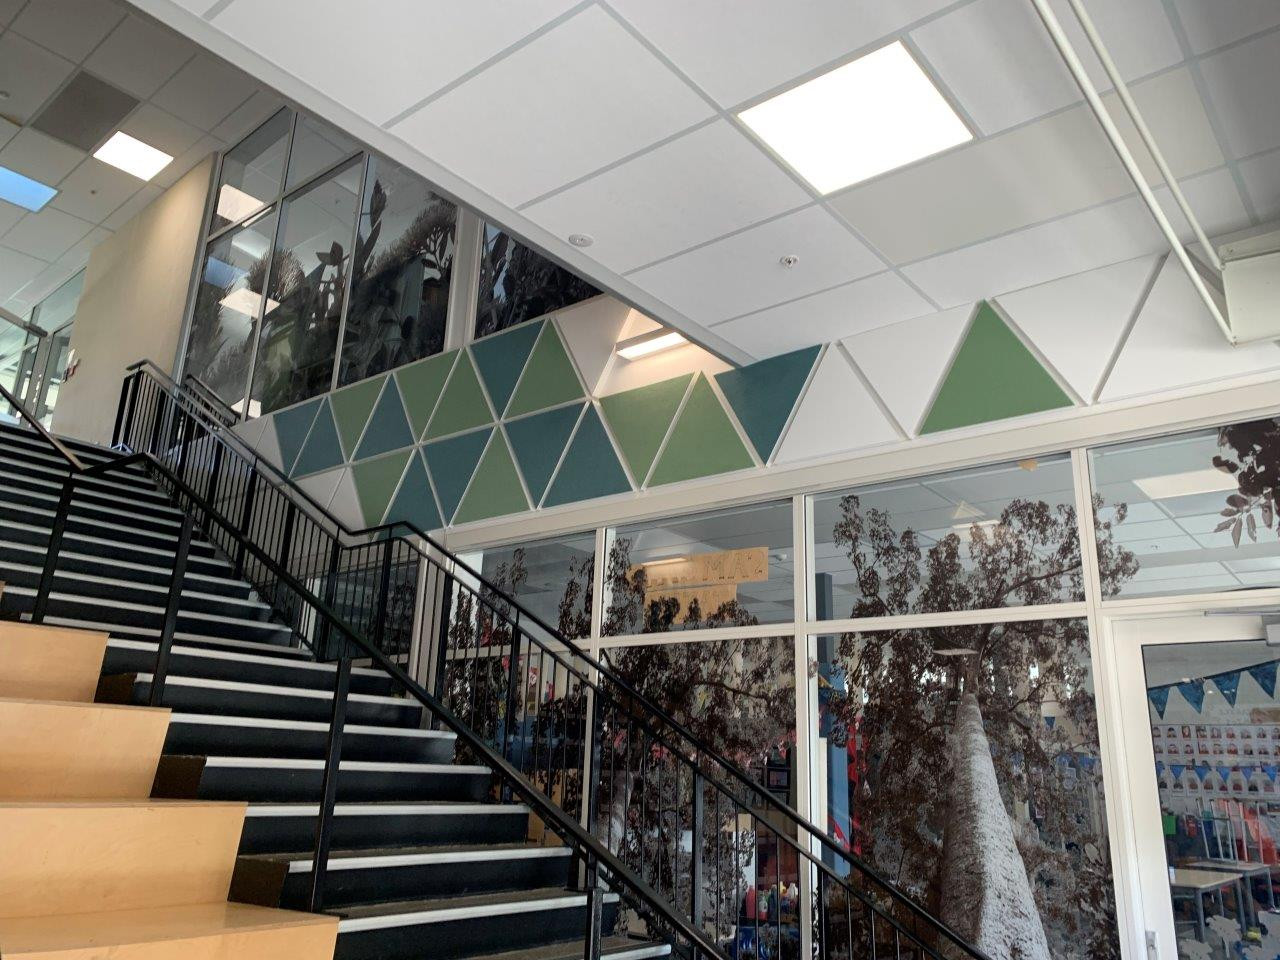 Balmoral School showcases beautiful glass panels with vibrant colors and detailed designs